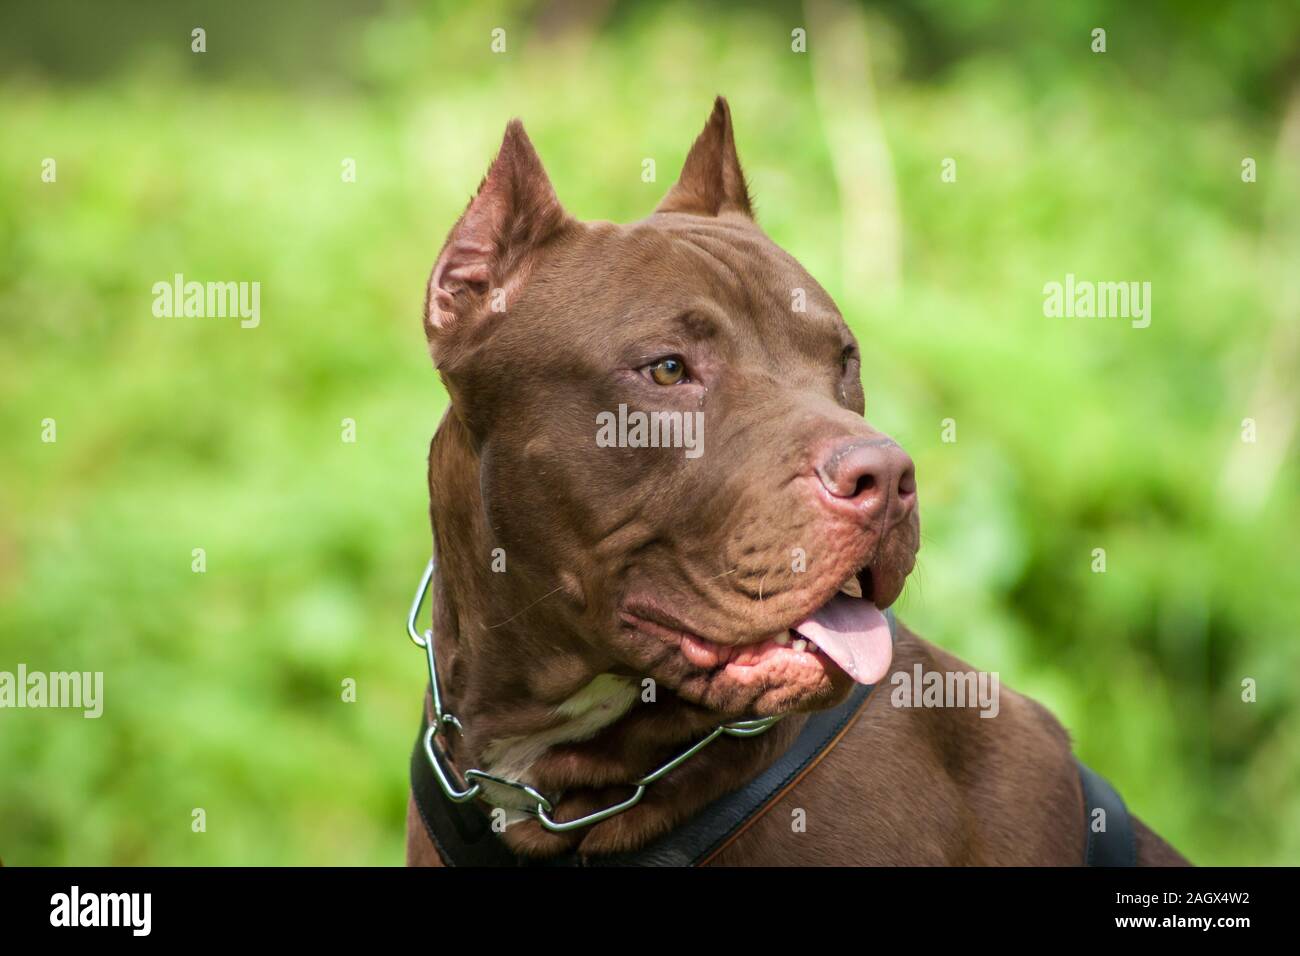 Dangerous Or Good Pets The American Bully Dog Youtube